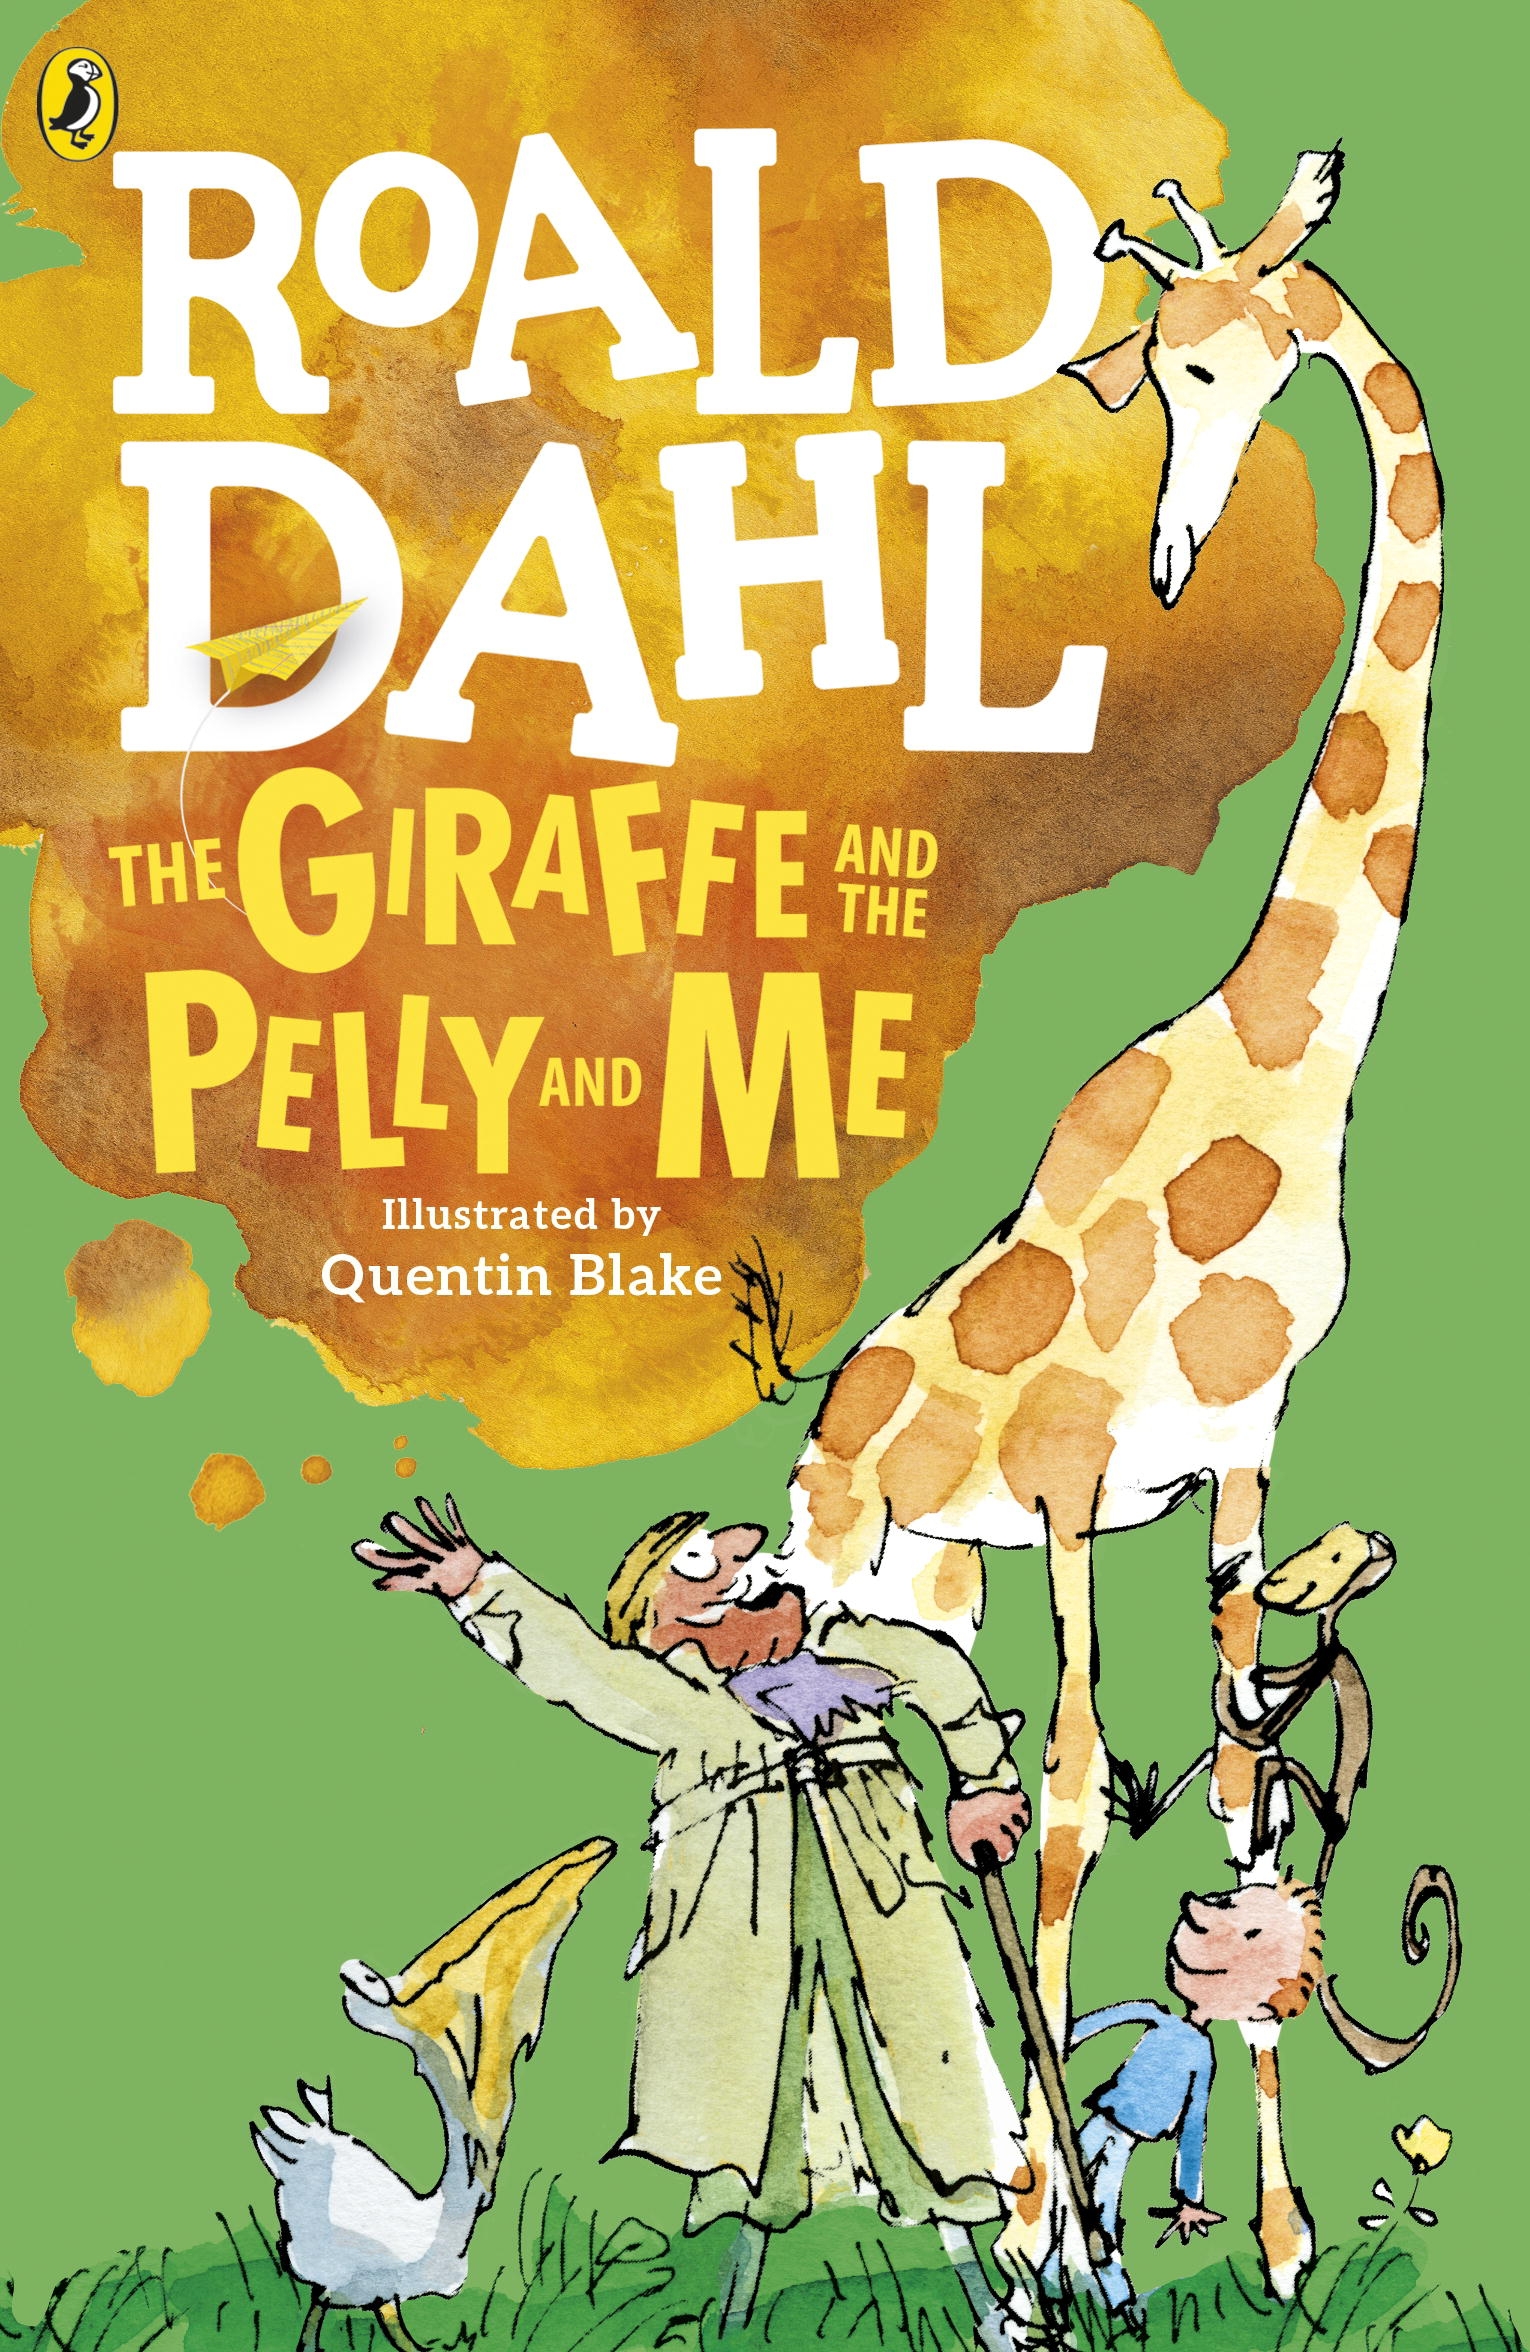 The Giraffe and the Pelly and Me by Roald Dahl - Penguin Books Australia